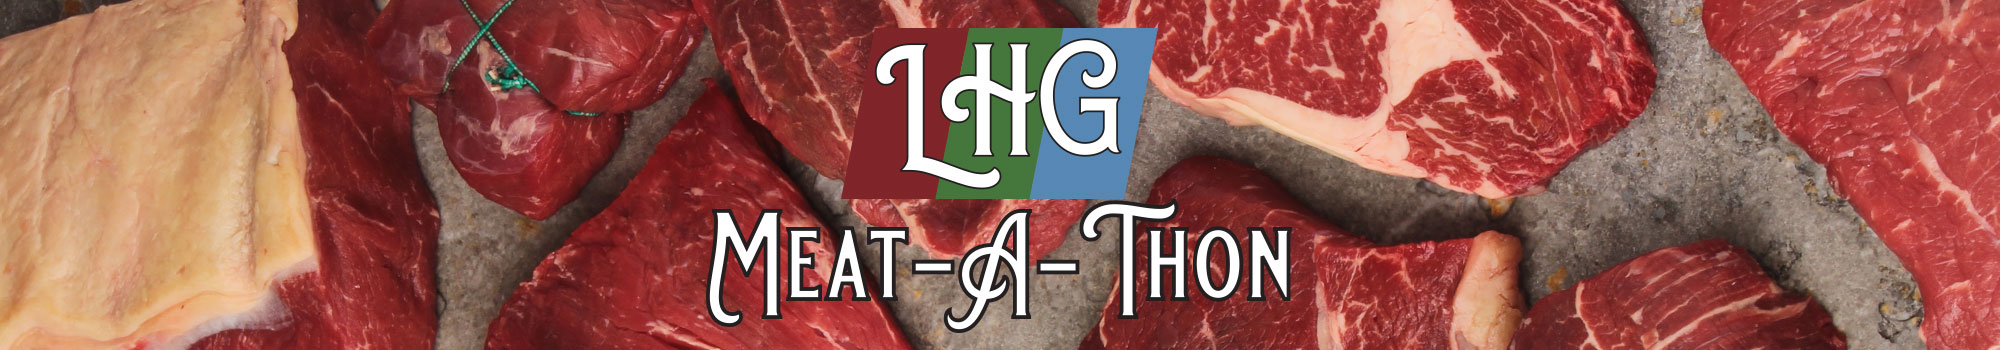 Meat-a-Thon text with various steaks in background